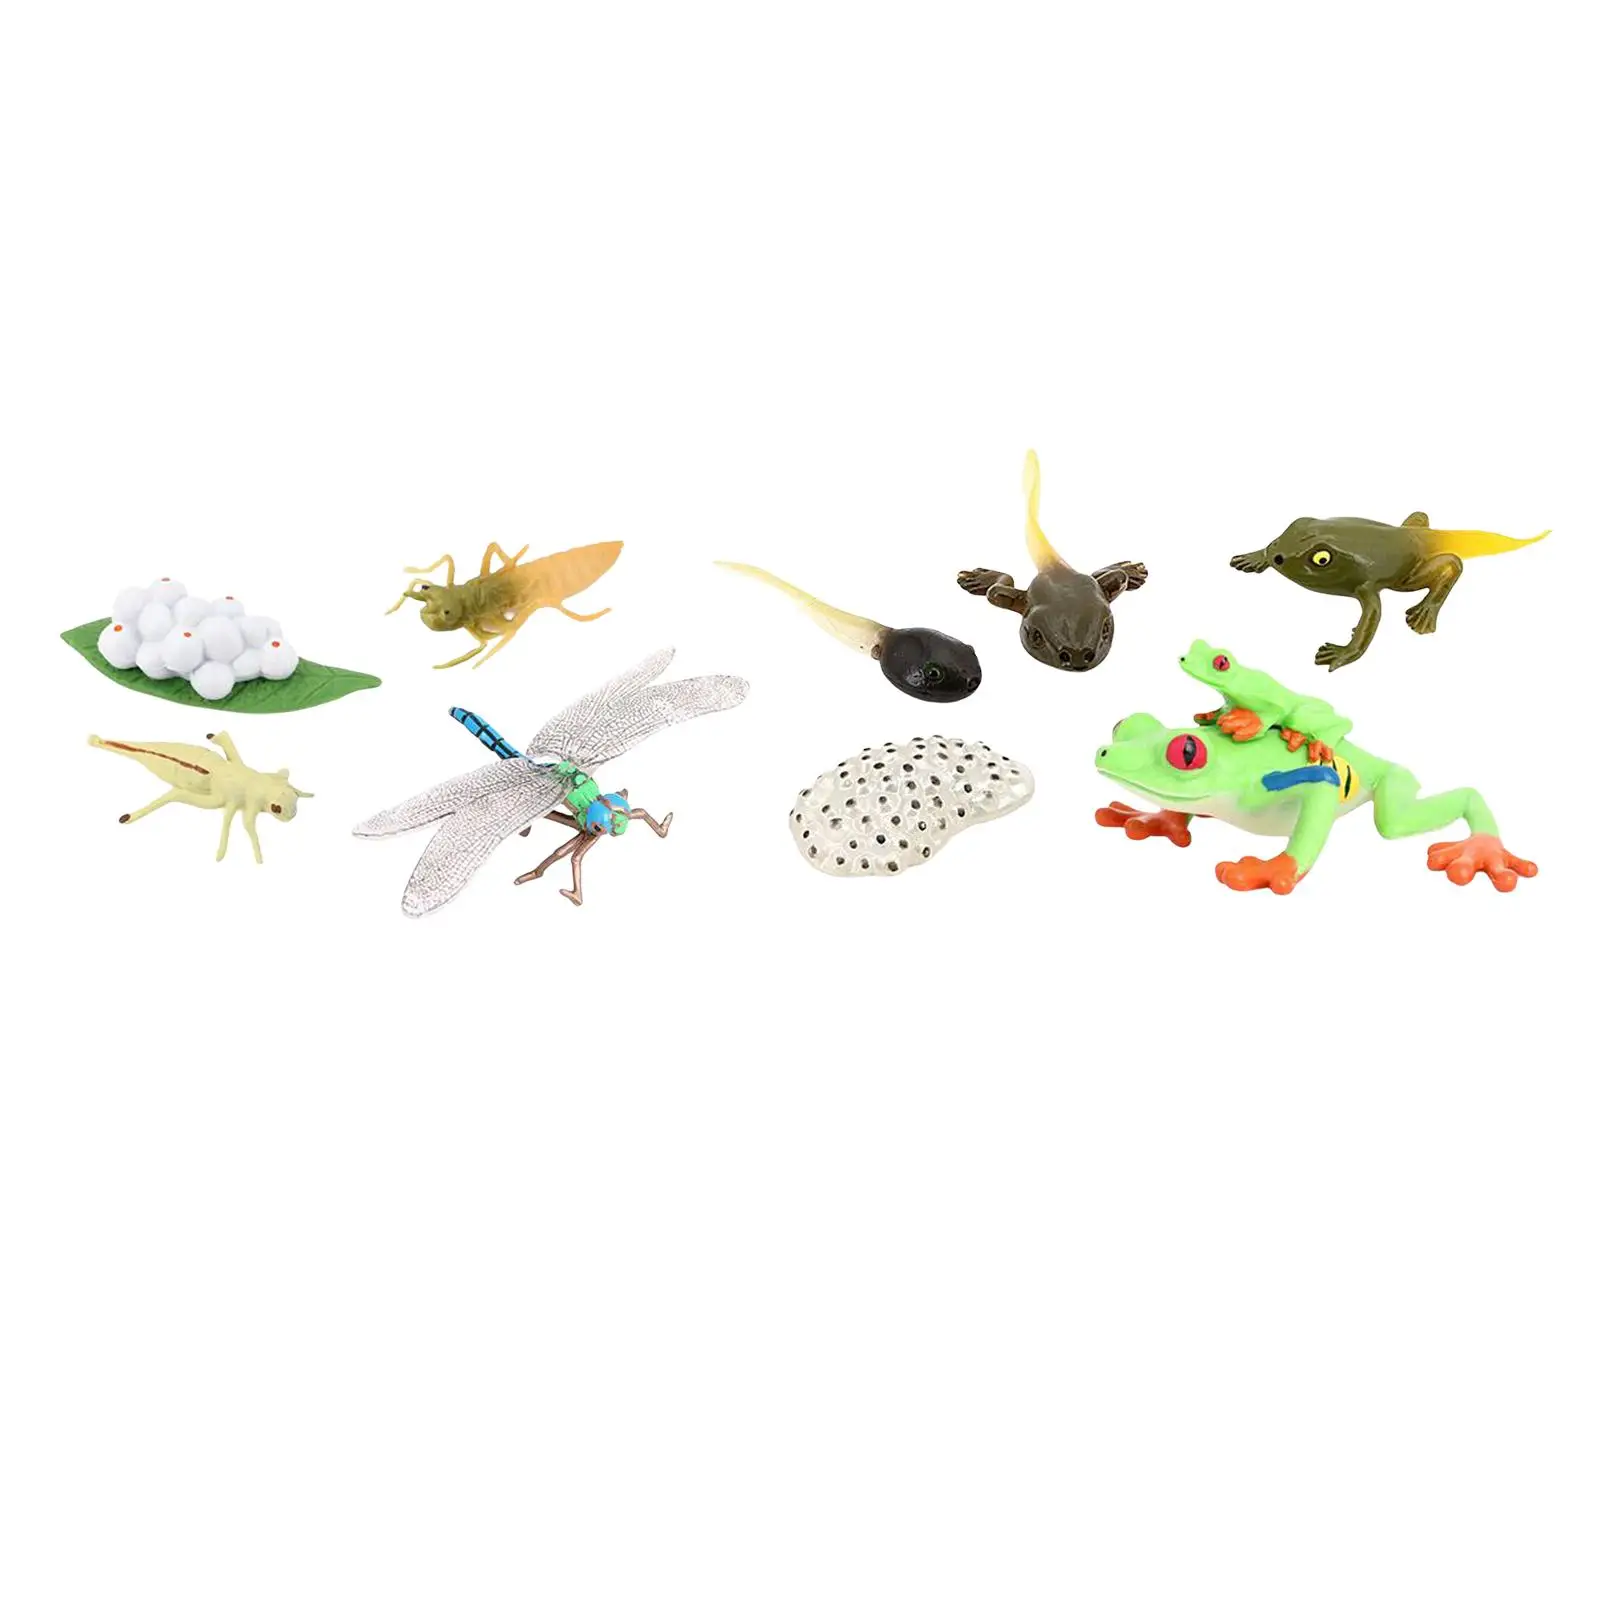 Simulation Life Cycle Figurines Toy Red Eyed Tree Frog Figures Dragonfly Figures Animal Growth Cycle for Party Favors Toddlers